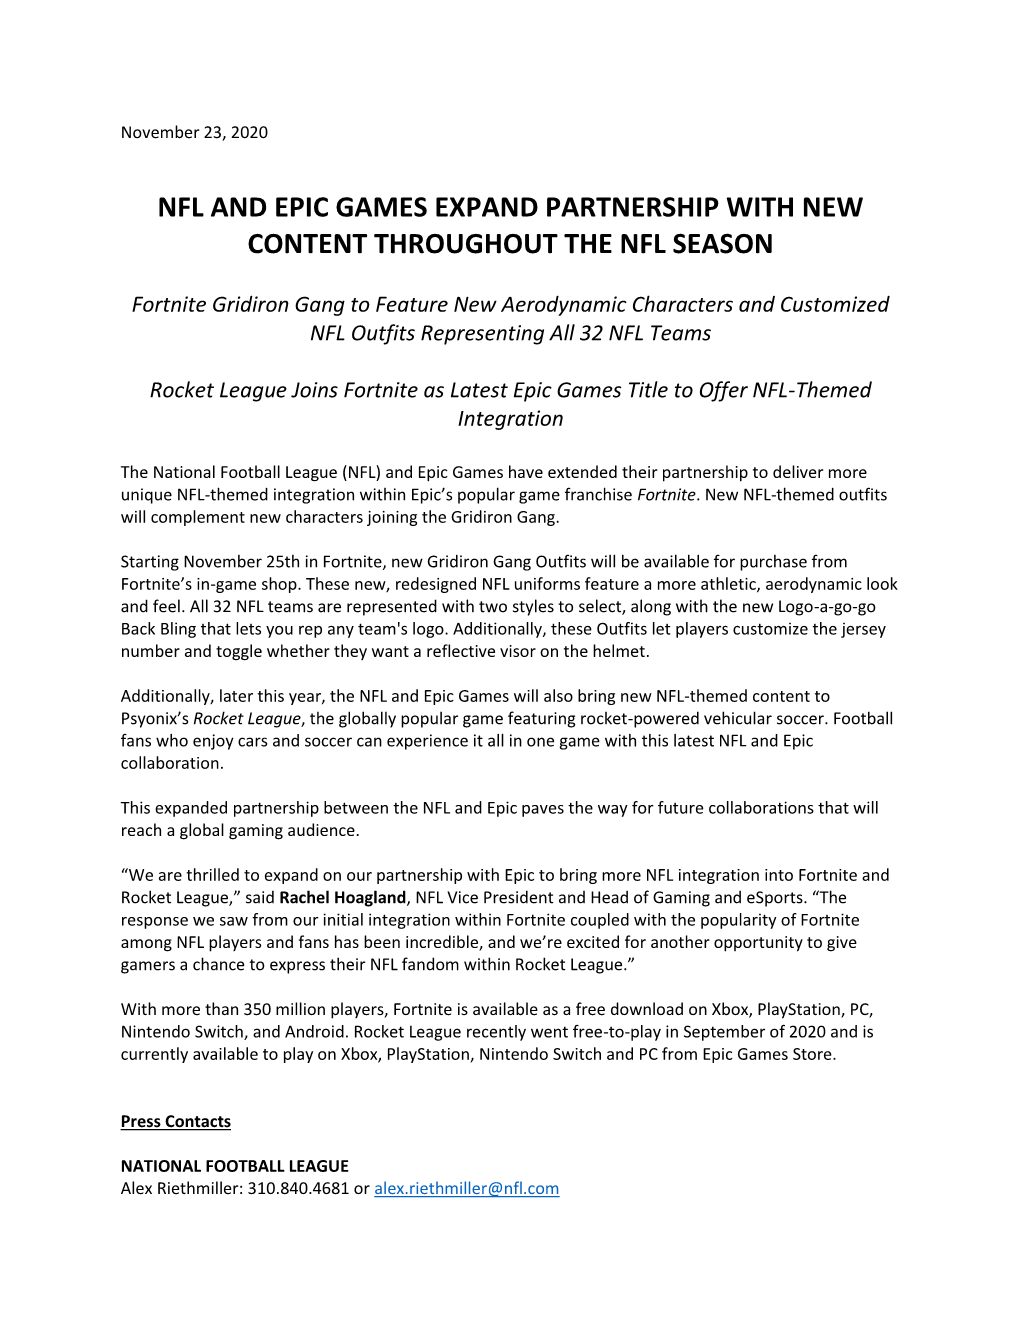 Nfl and Epic Games Expand Partnership with New Content Throughout the Nfl Season